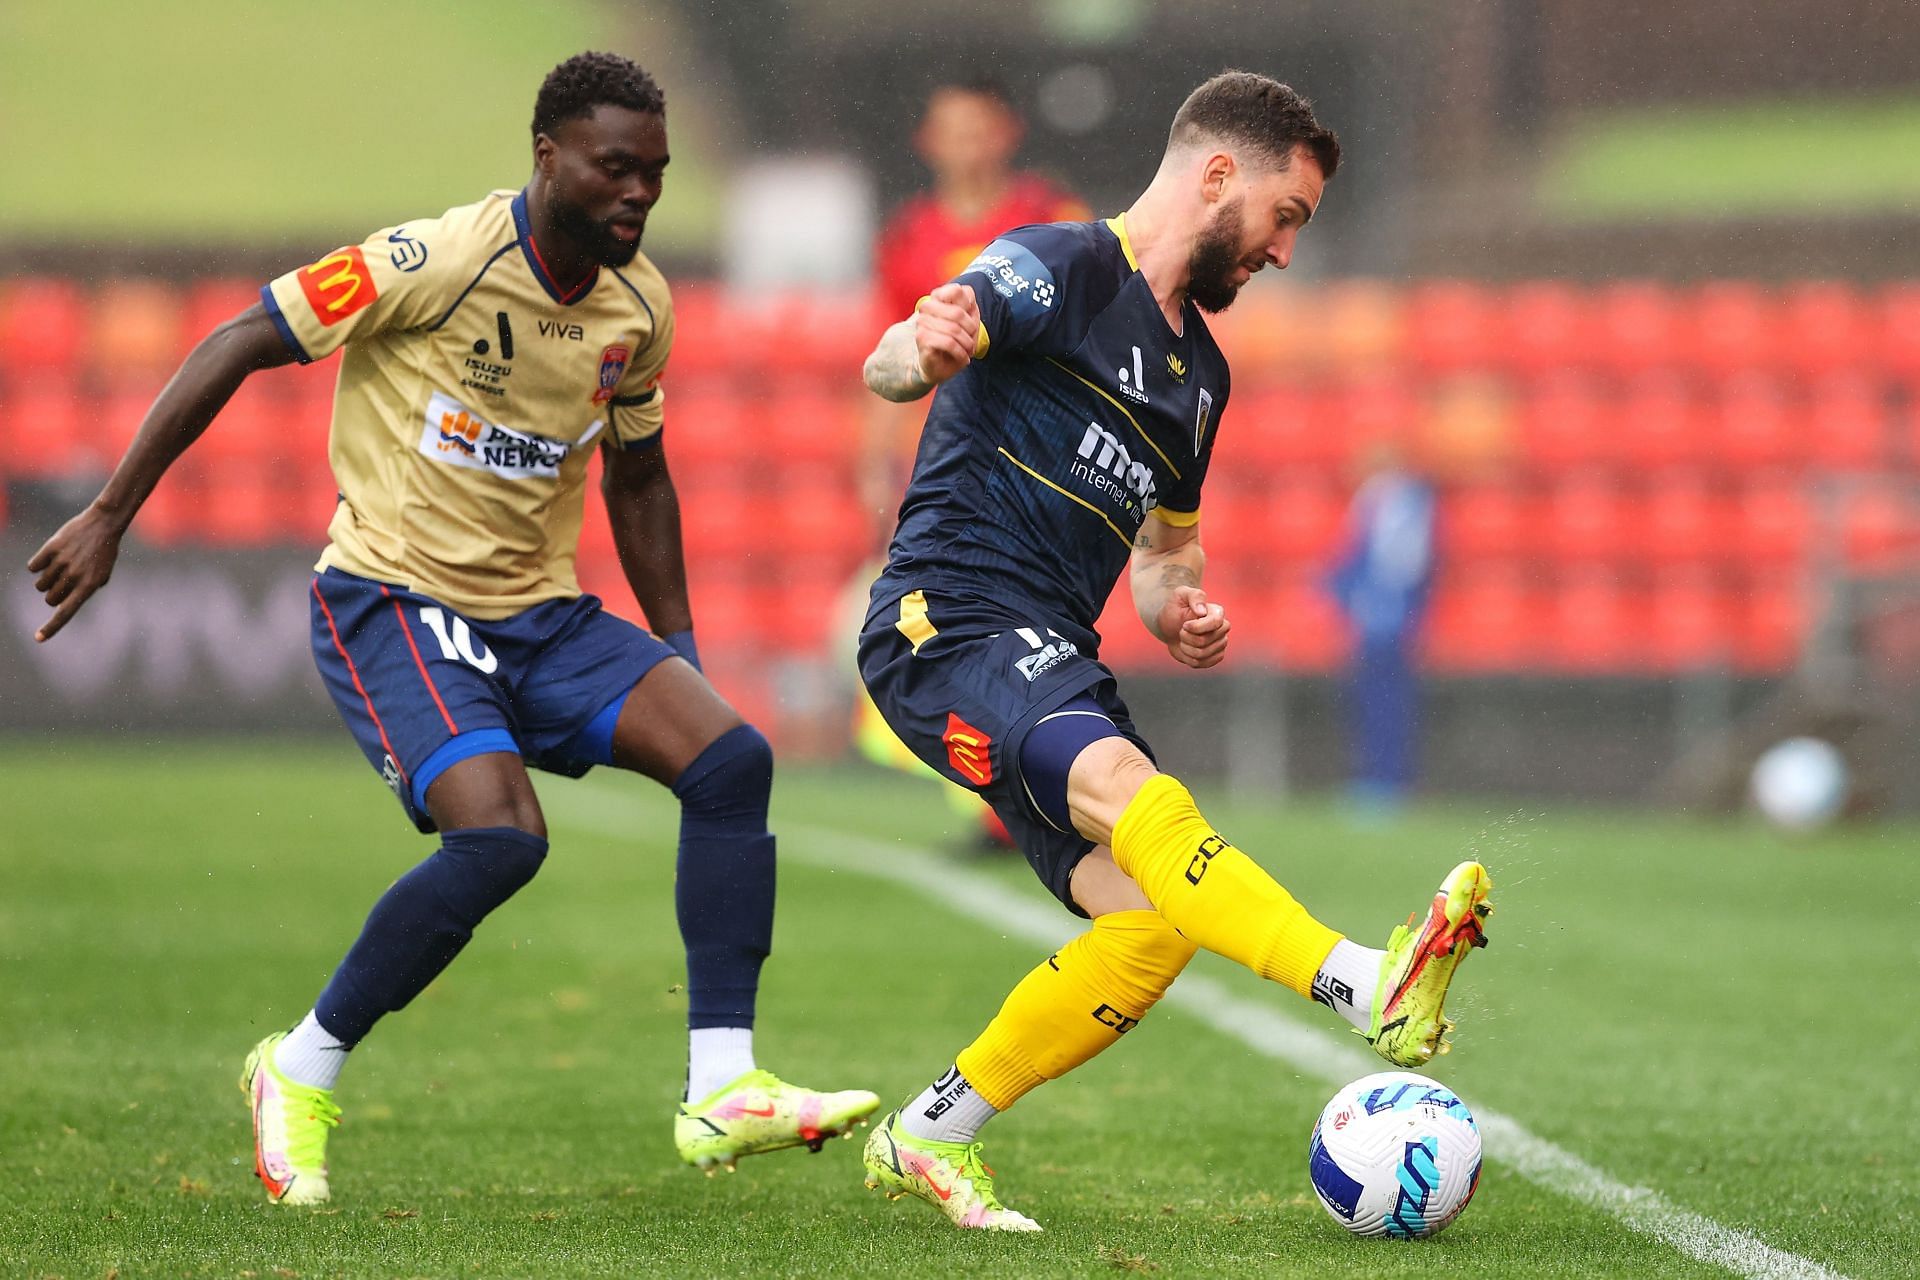 Central Coast Mariners take on Newcastle Jets this weekend